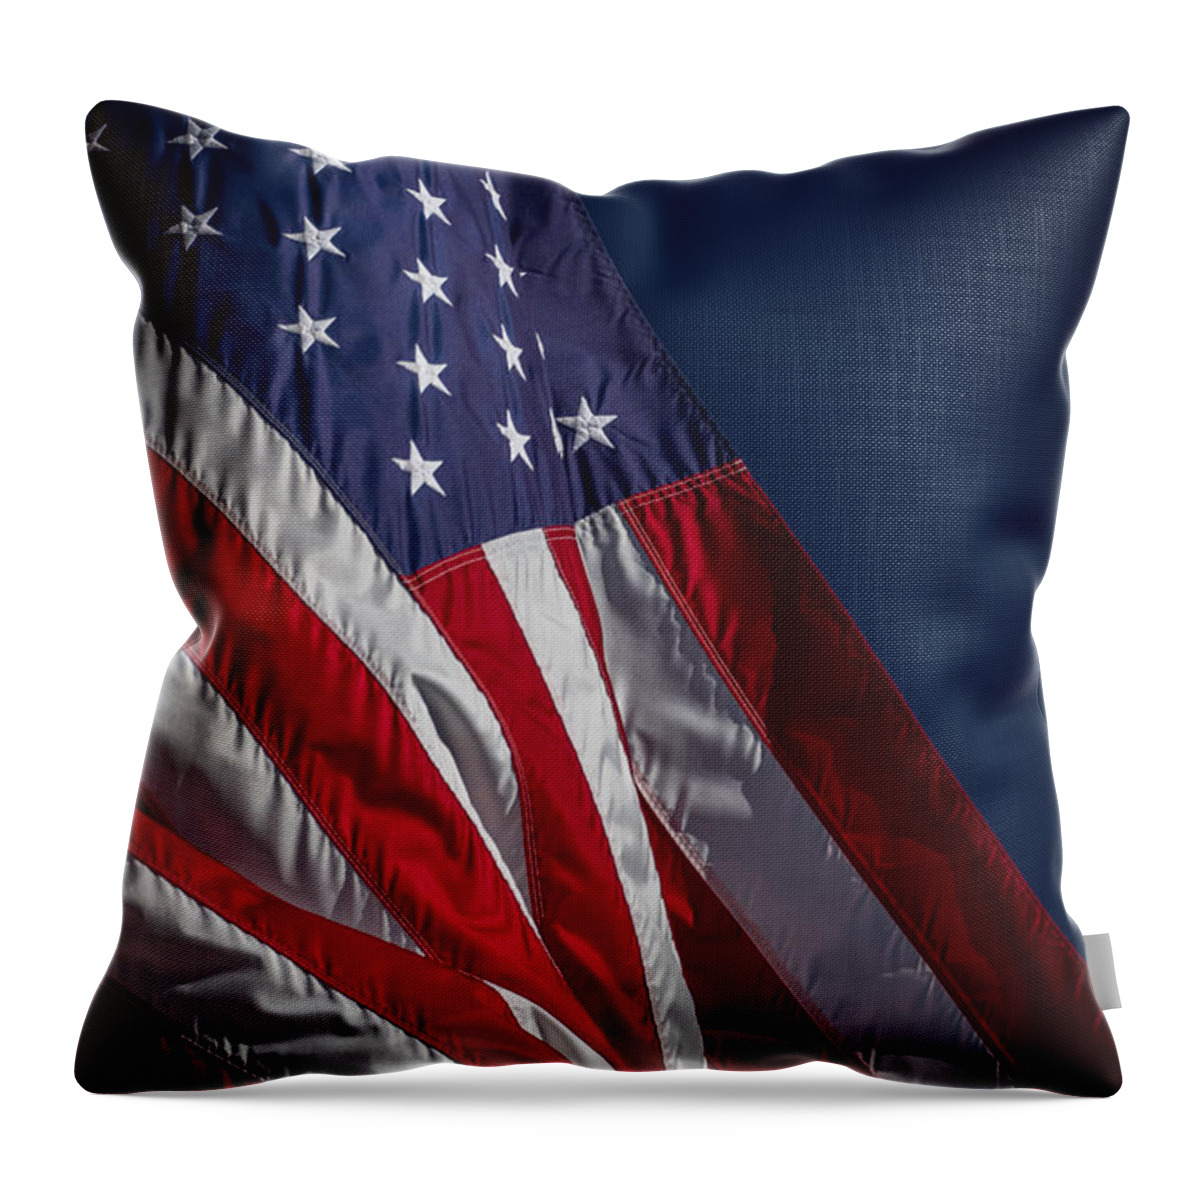 Flag Throw Pillow featuring the photograph Constitution Day by Linda Bonaccorsi